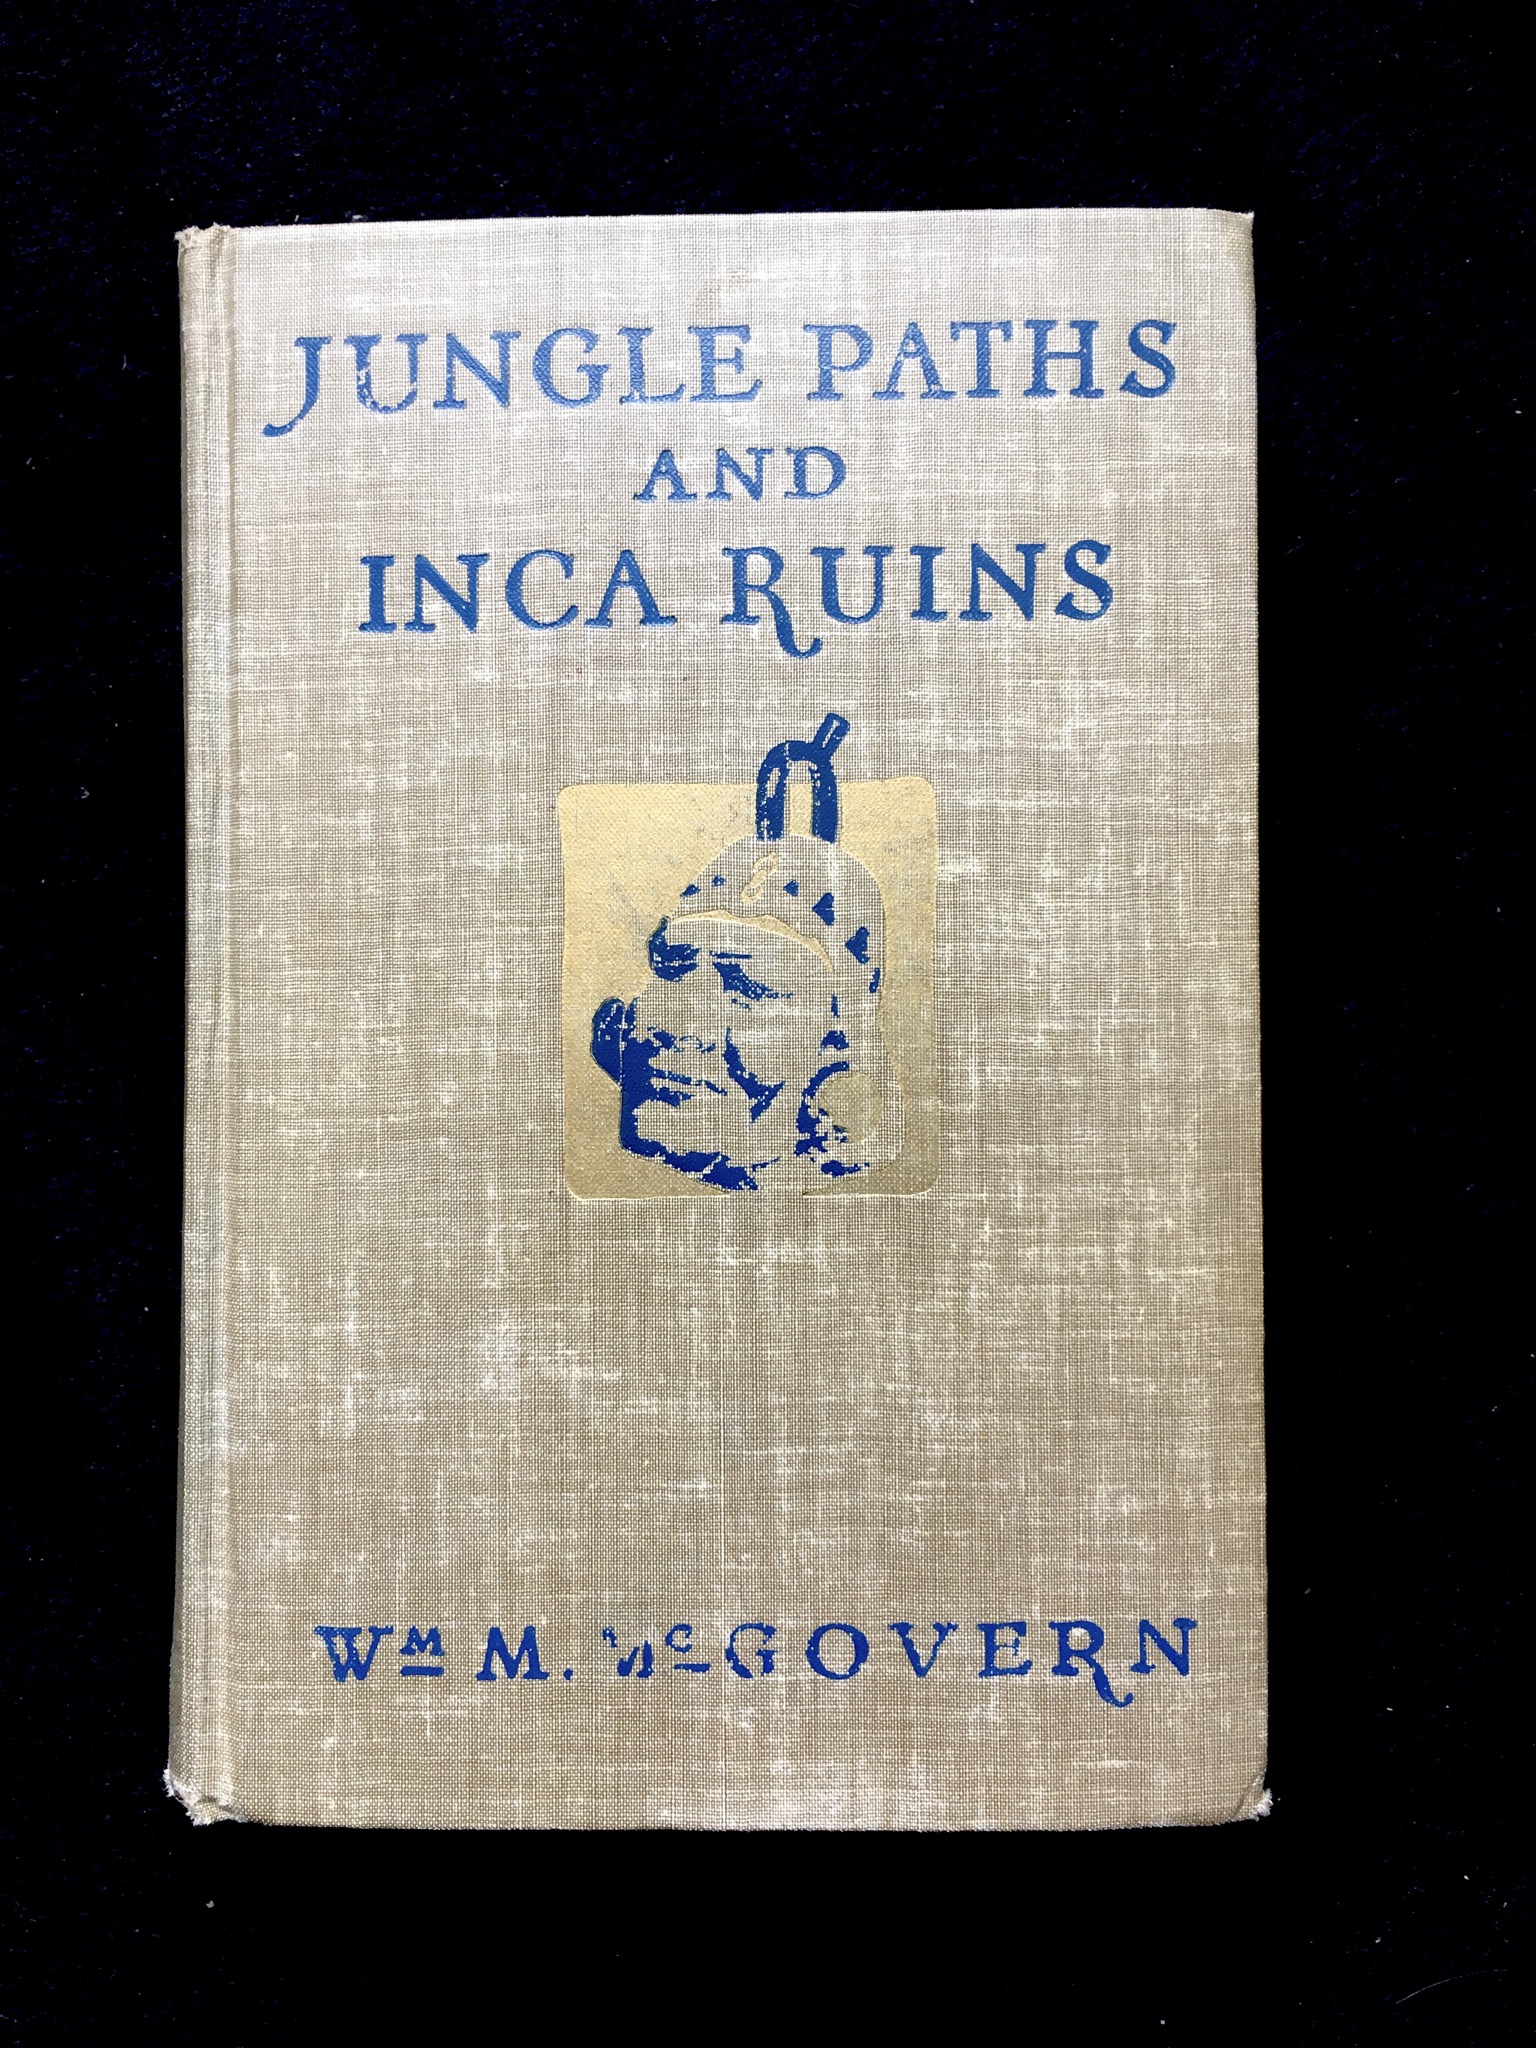 Jungle Paths and Inca Ruins by William Montgomery McGovern